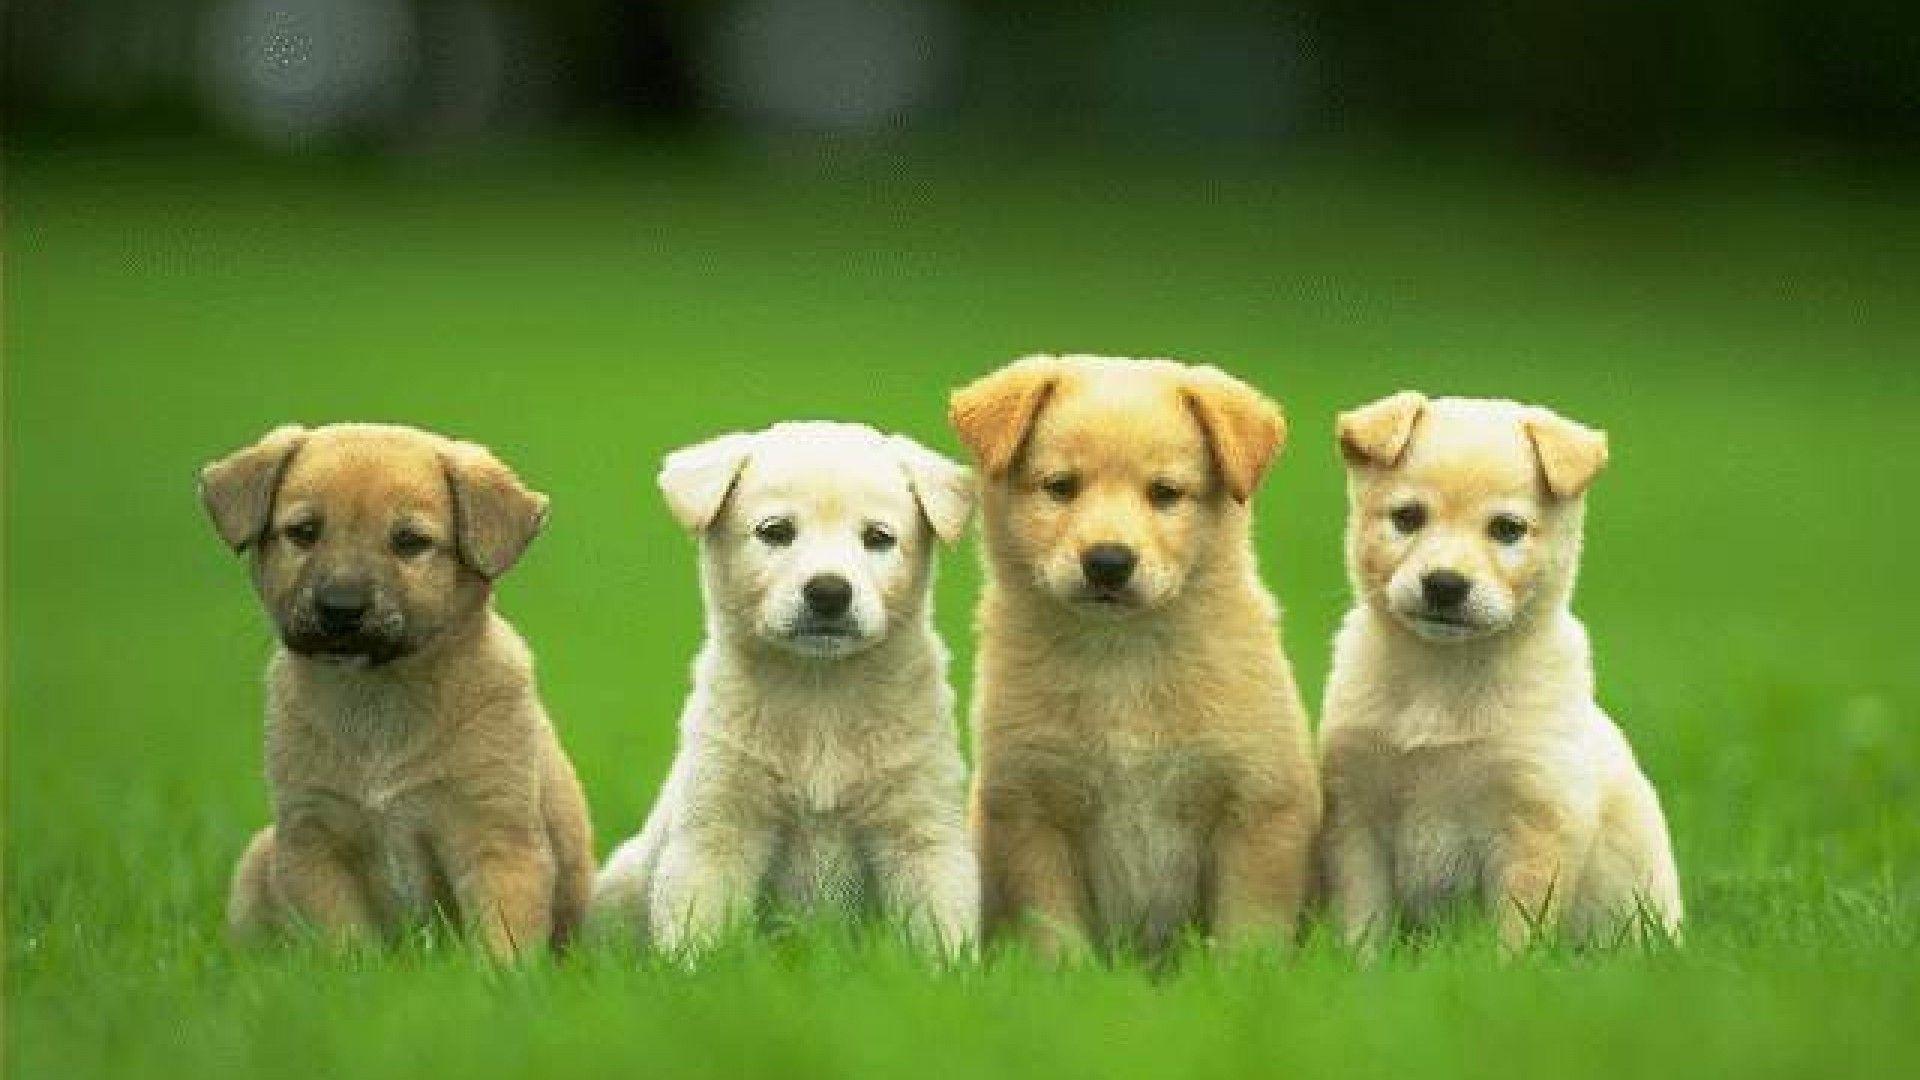 Puppy Hd Wallpapers - Wallpaper Cave